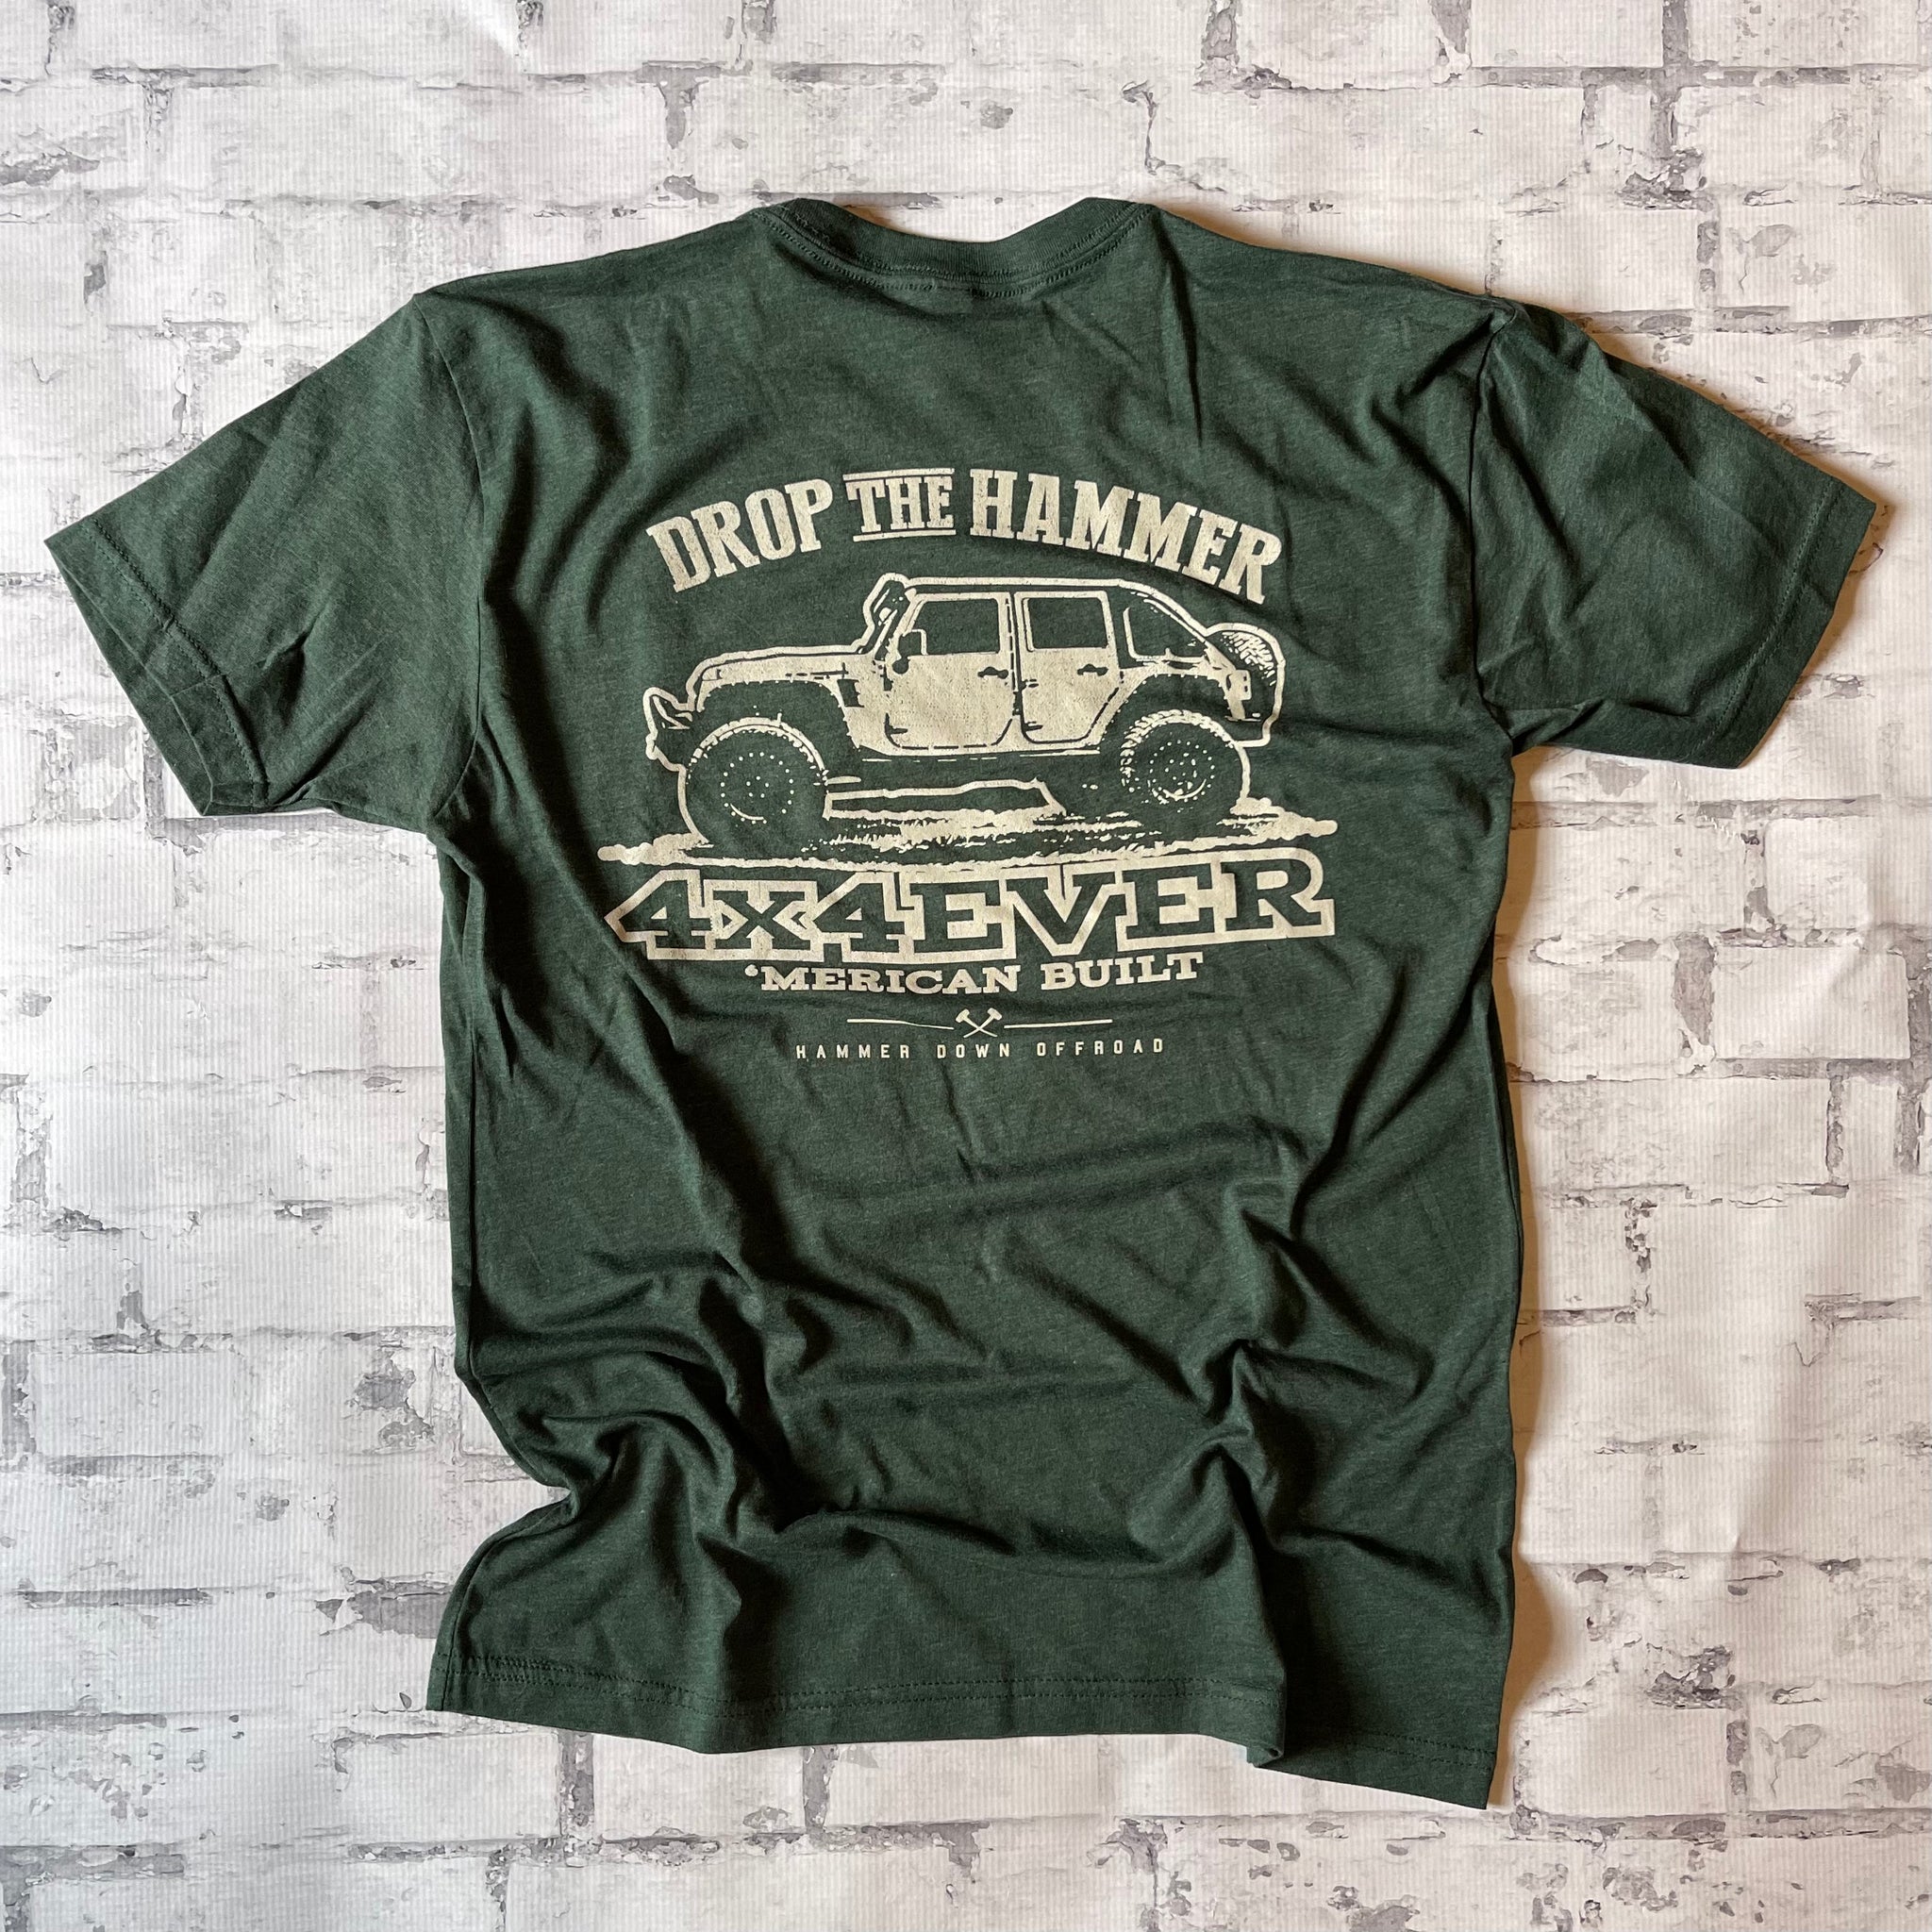 Hammer Down "4x4 Ever" Short Sleeve T-shirt - Forest Green - Southern Charm "Shop The Charm"